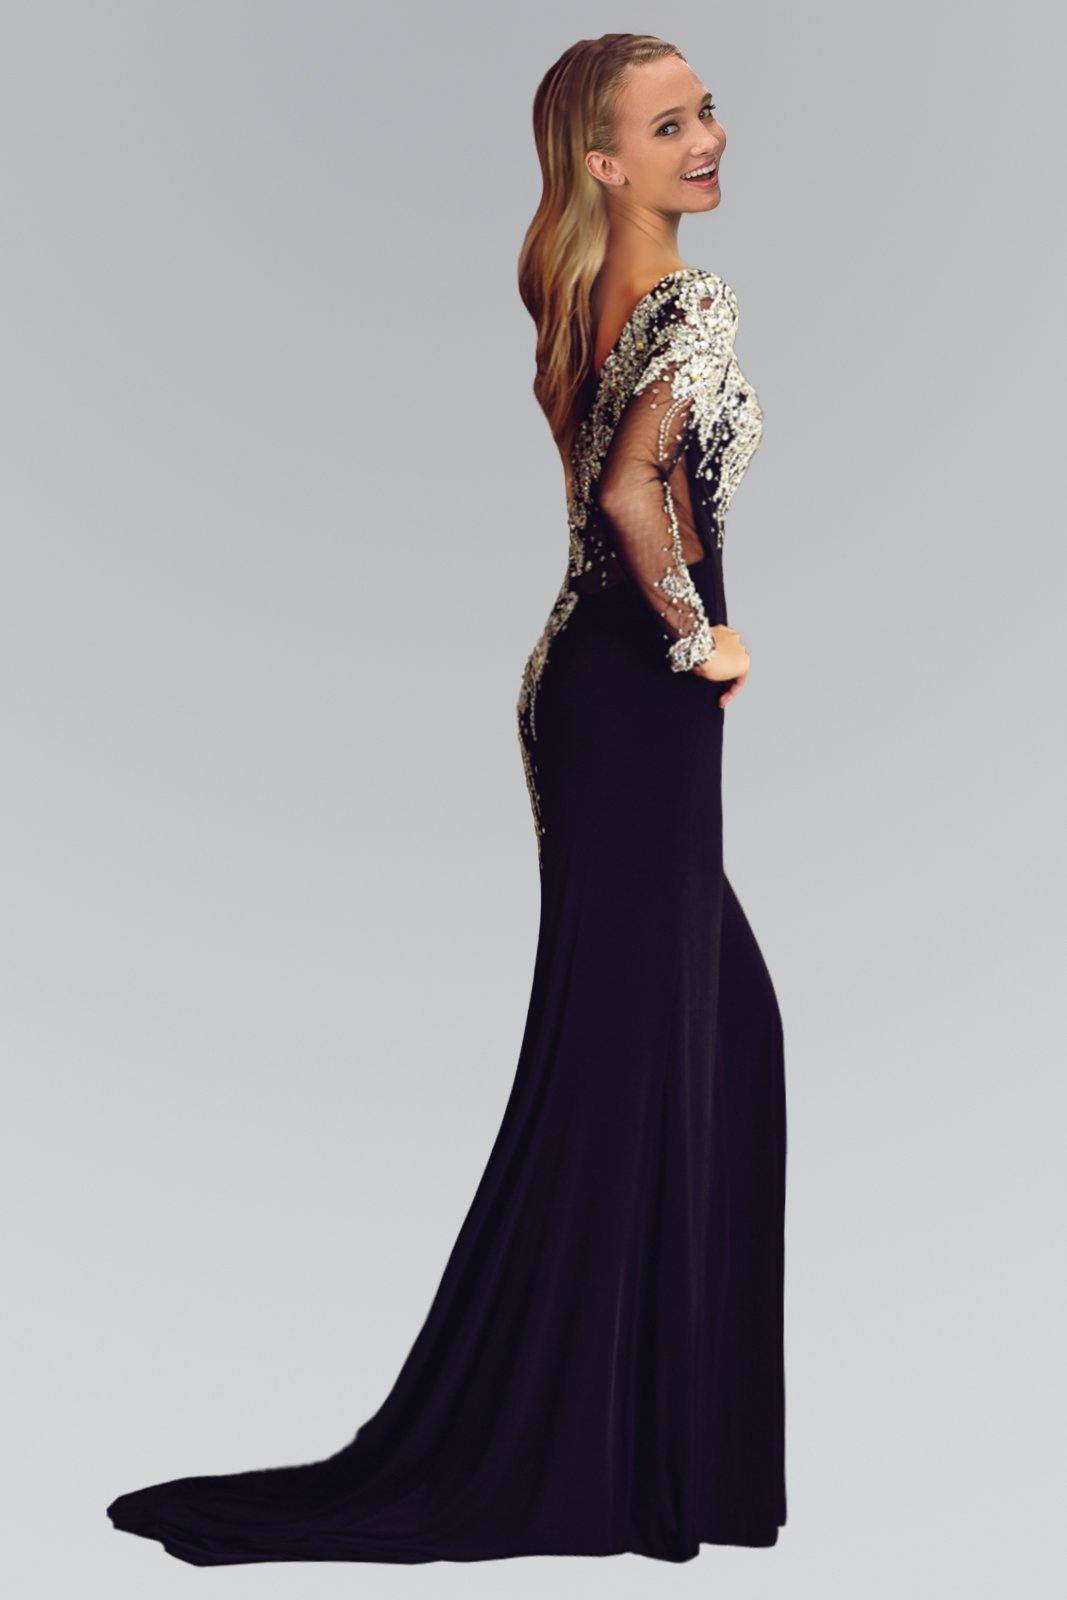 Long Prom Dress with Sparkling Sequins and Beads - The Dress Outlet Elizabeth K